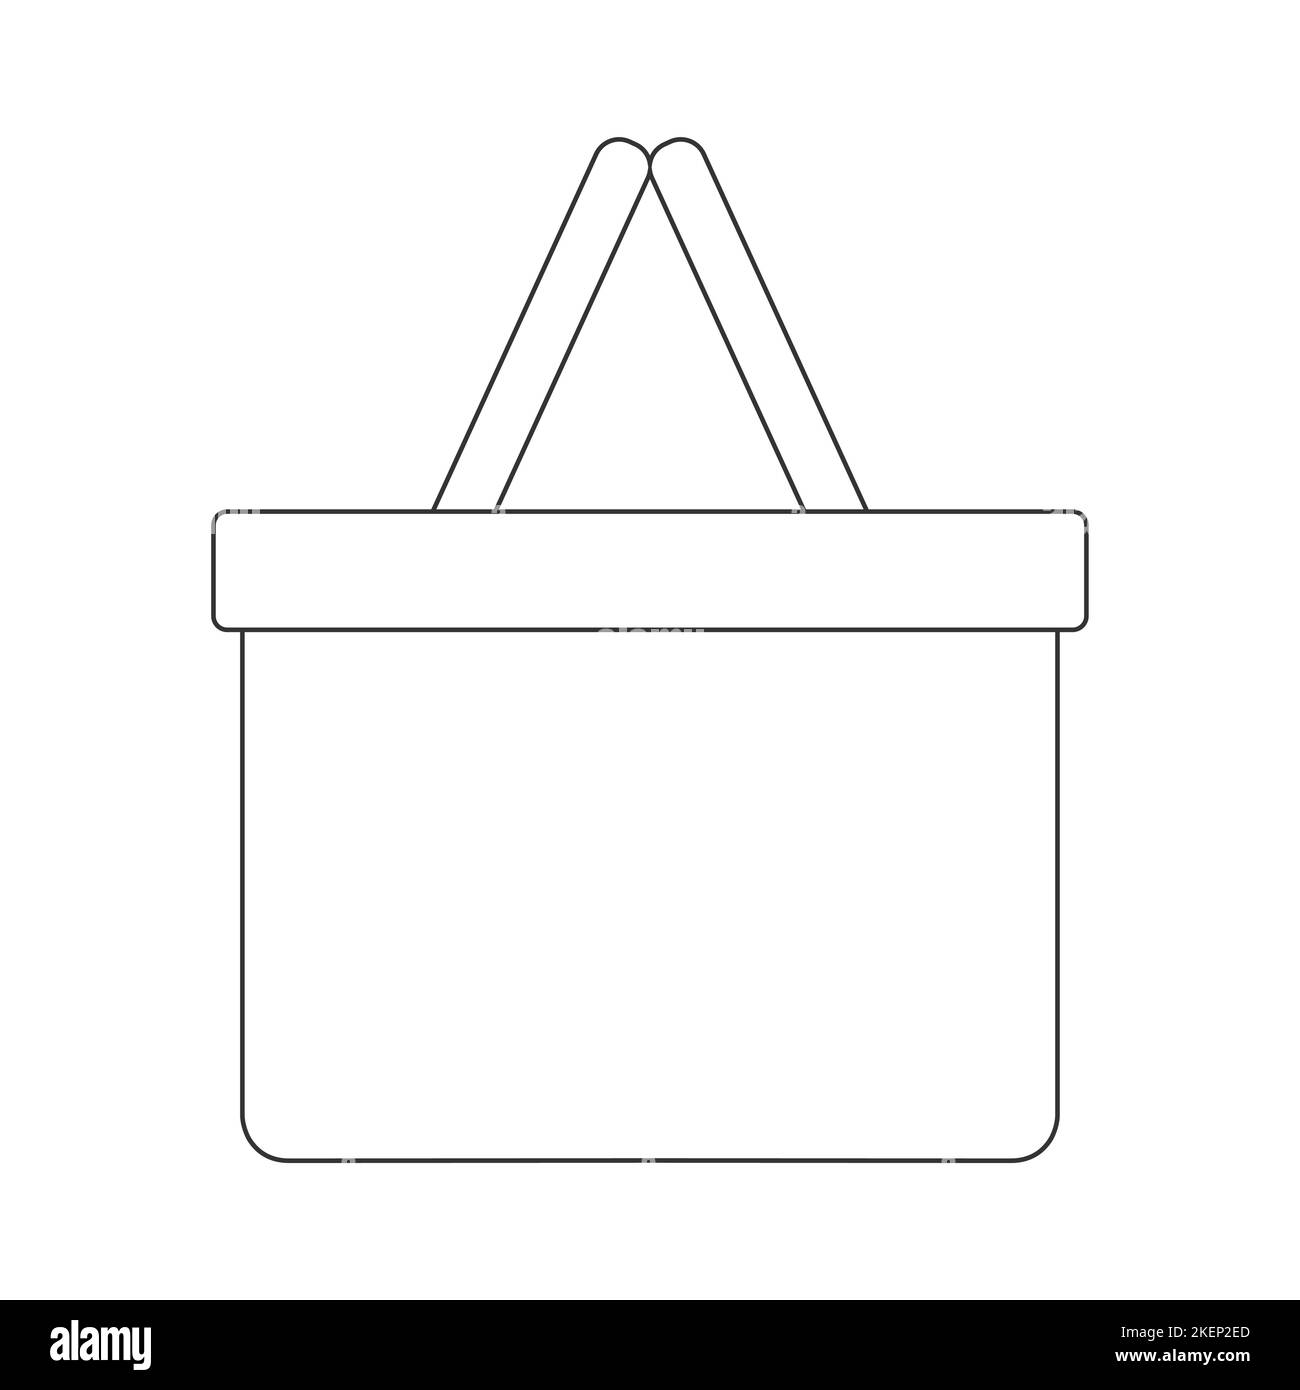 https://c8.alamy.com/comp/2KEP2ED/picnic-basket-outline-icon-hand-made-wicker-willow-hamper-with-two-handles-isolated-on-white-background-vector-graphic-illustration-2KEP2ED.jpg